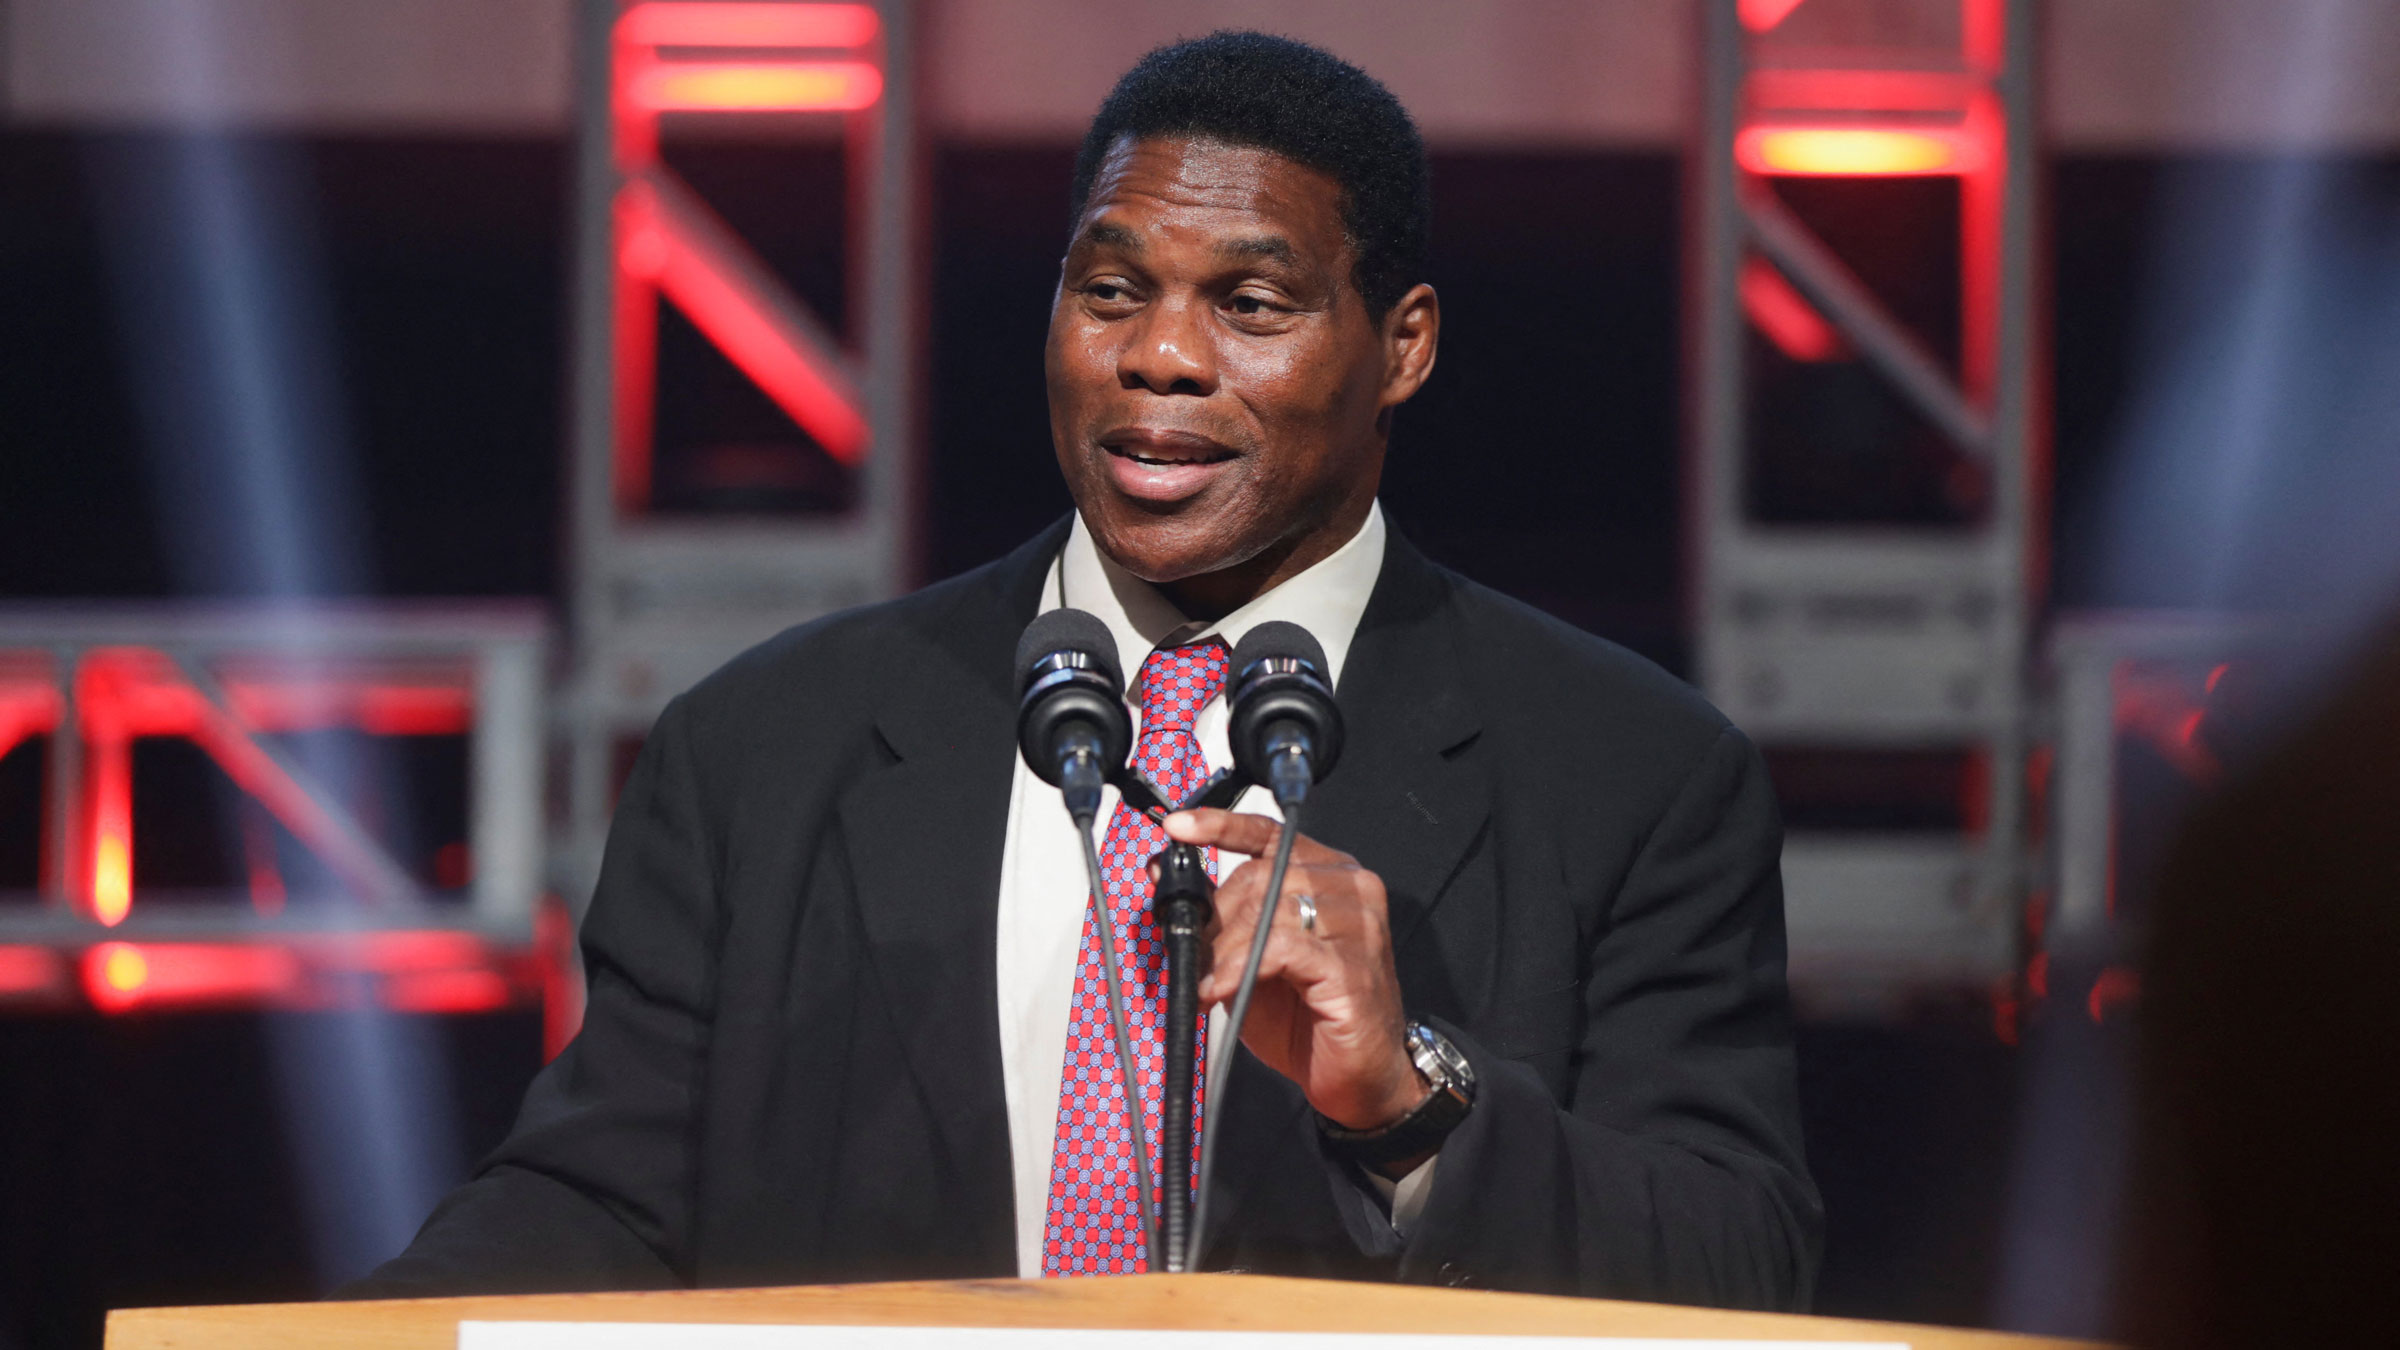 Herschel Walker speaks during his election night party in Atlanta on Tuesday.